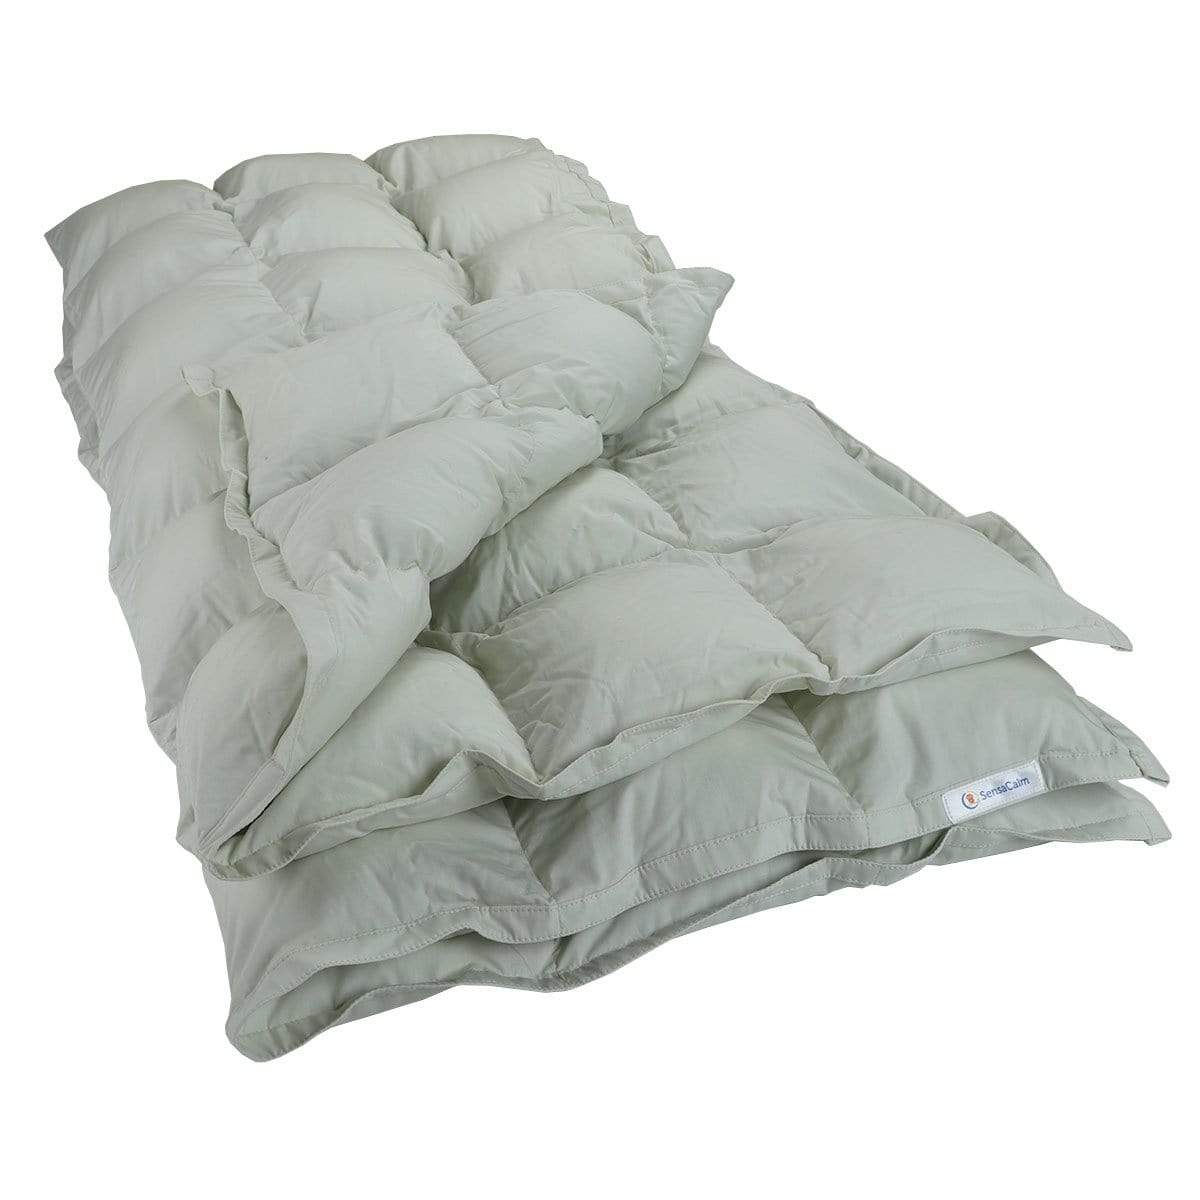 Clearance Weighted Blanket - Full 25 lb Off White/Charcoal chevron cuddle backing no polyfill (for 131-200 lb user)